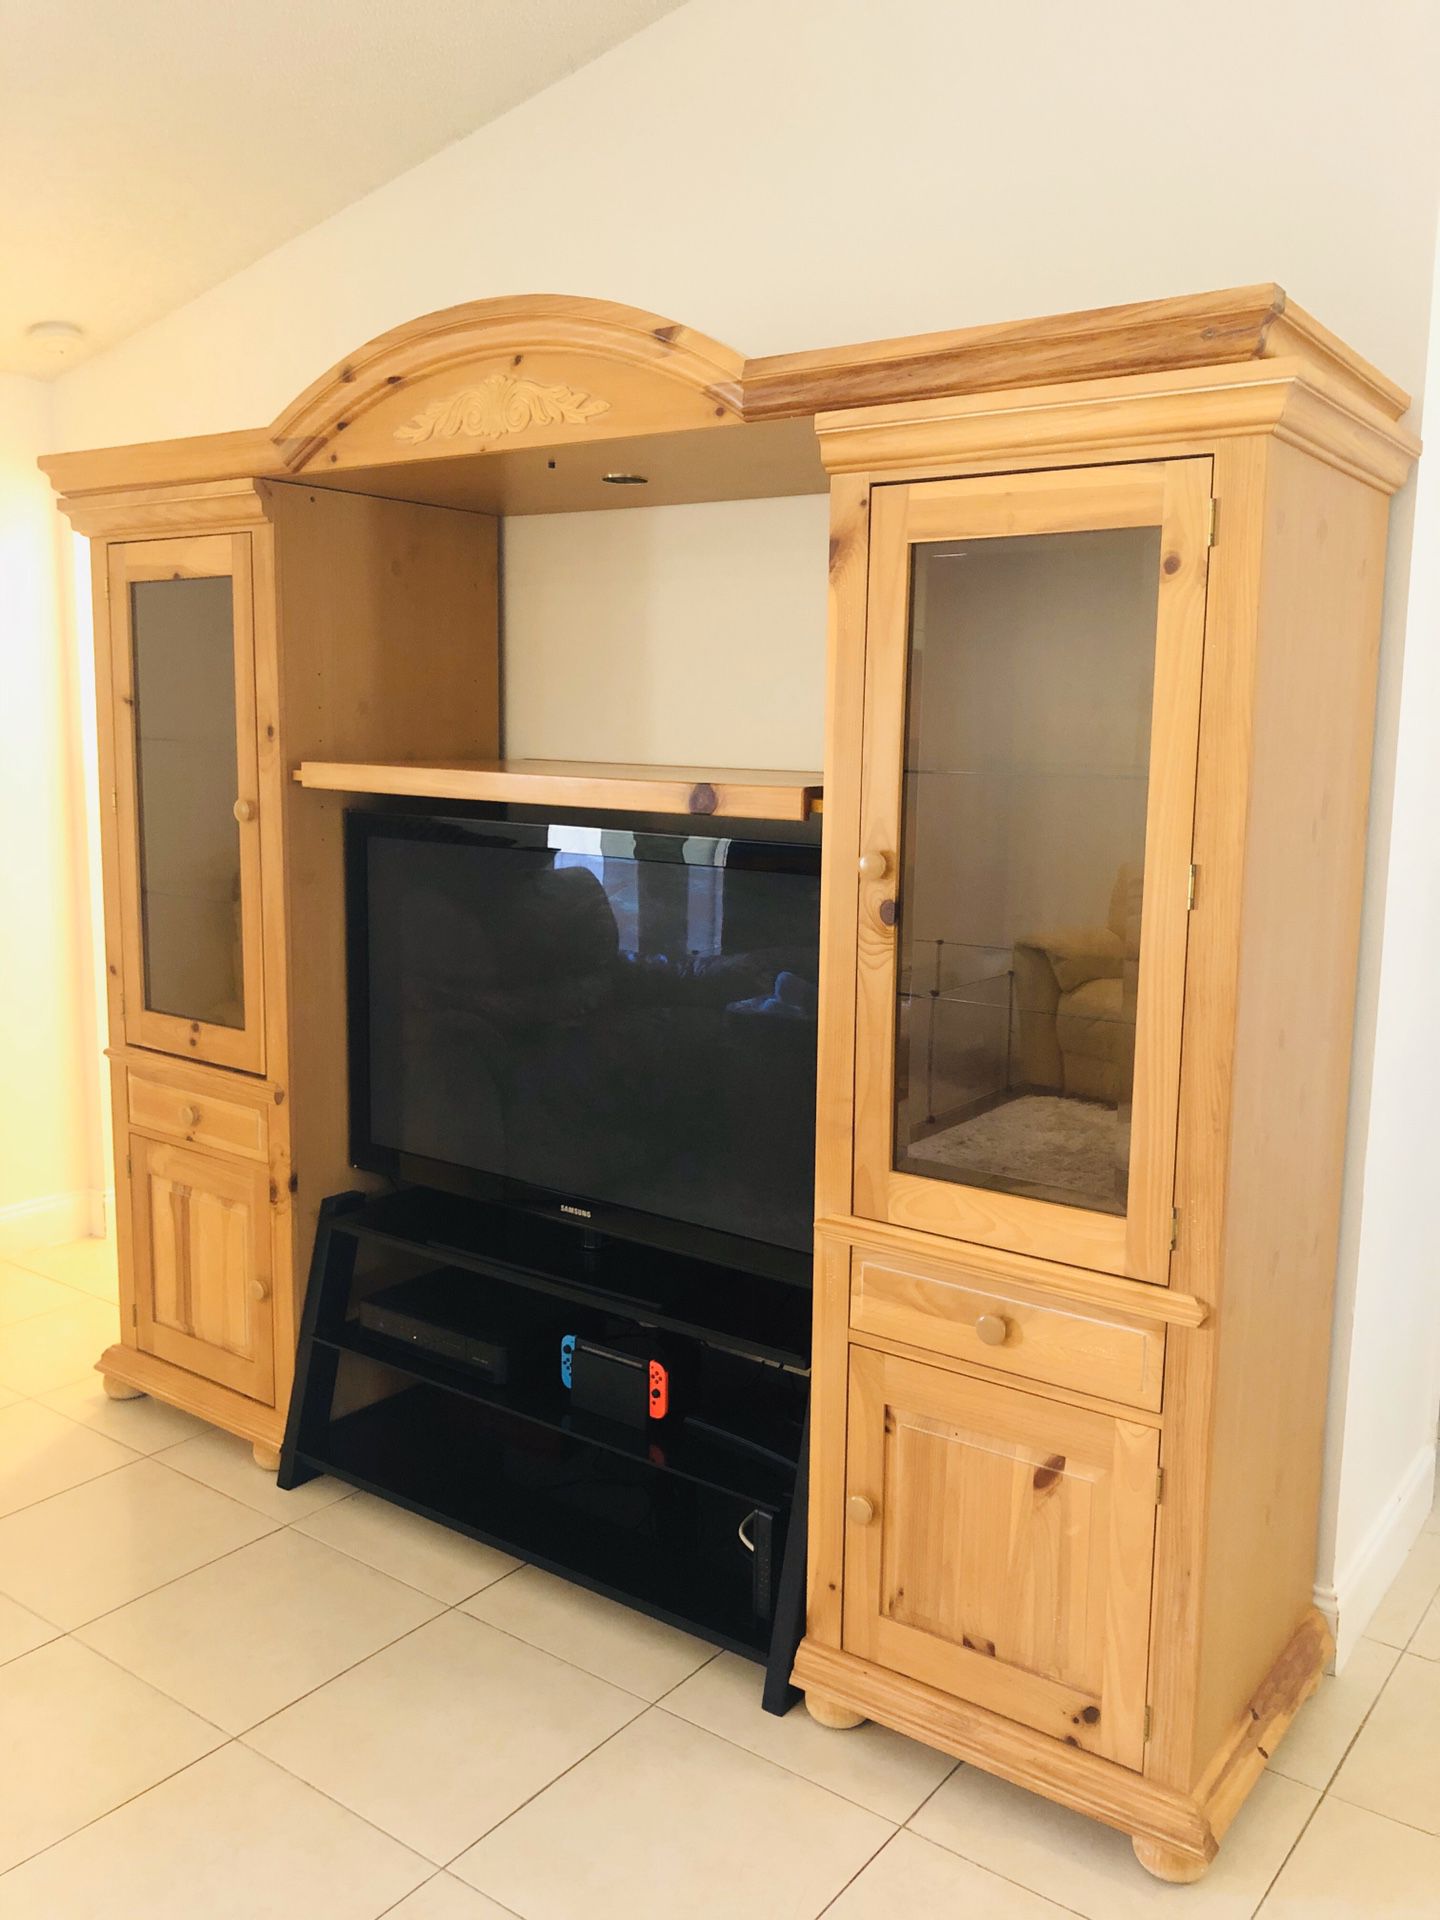 4 Piece entertainment center with TV stand